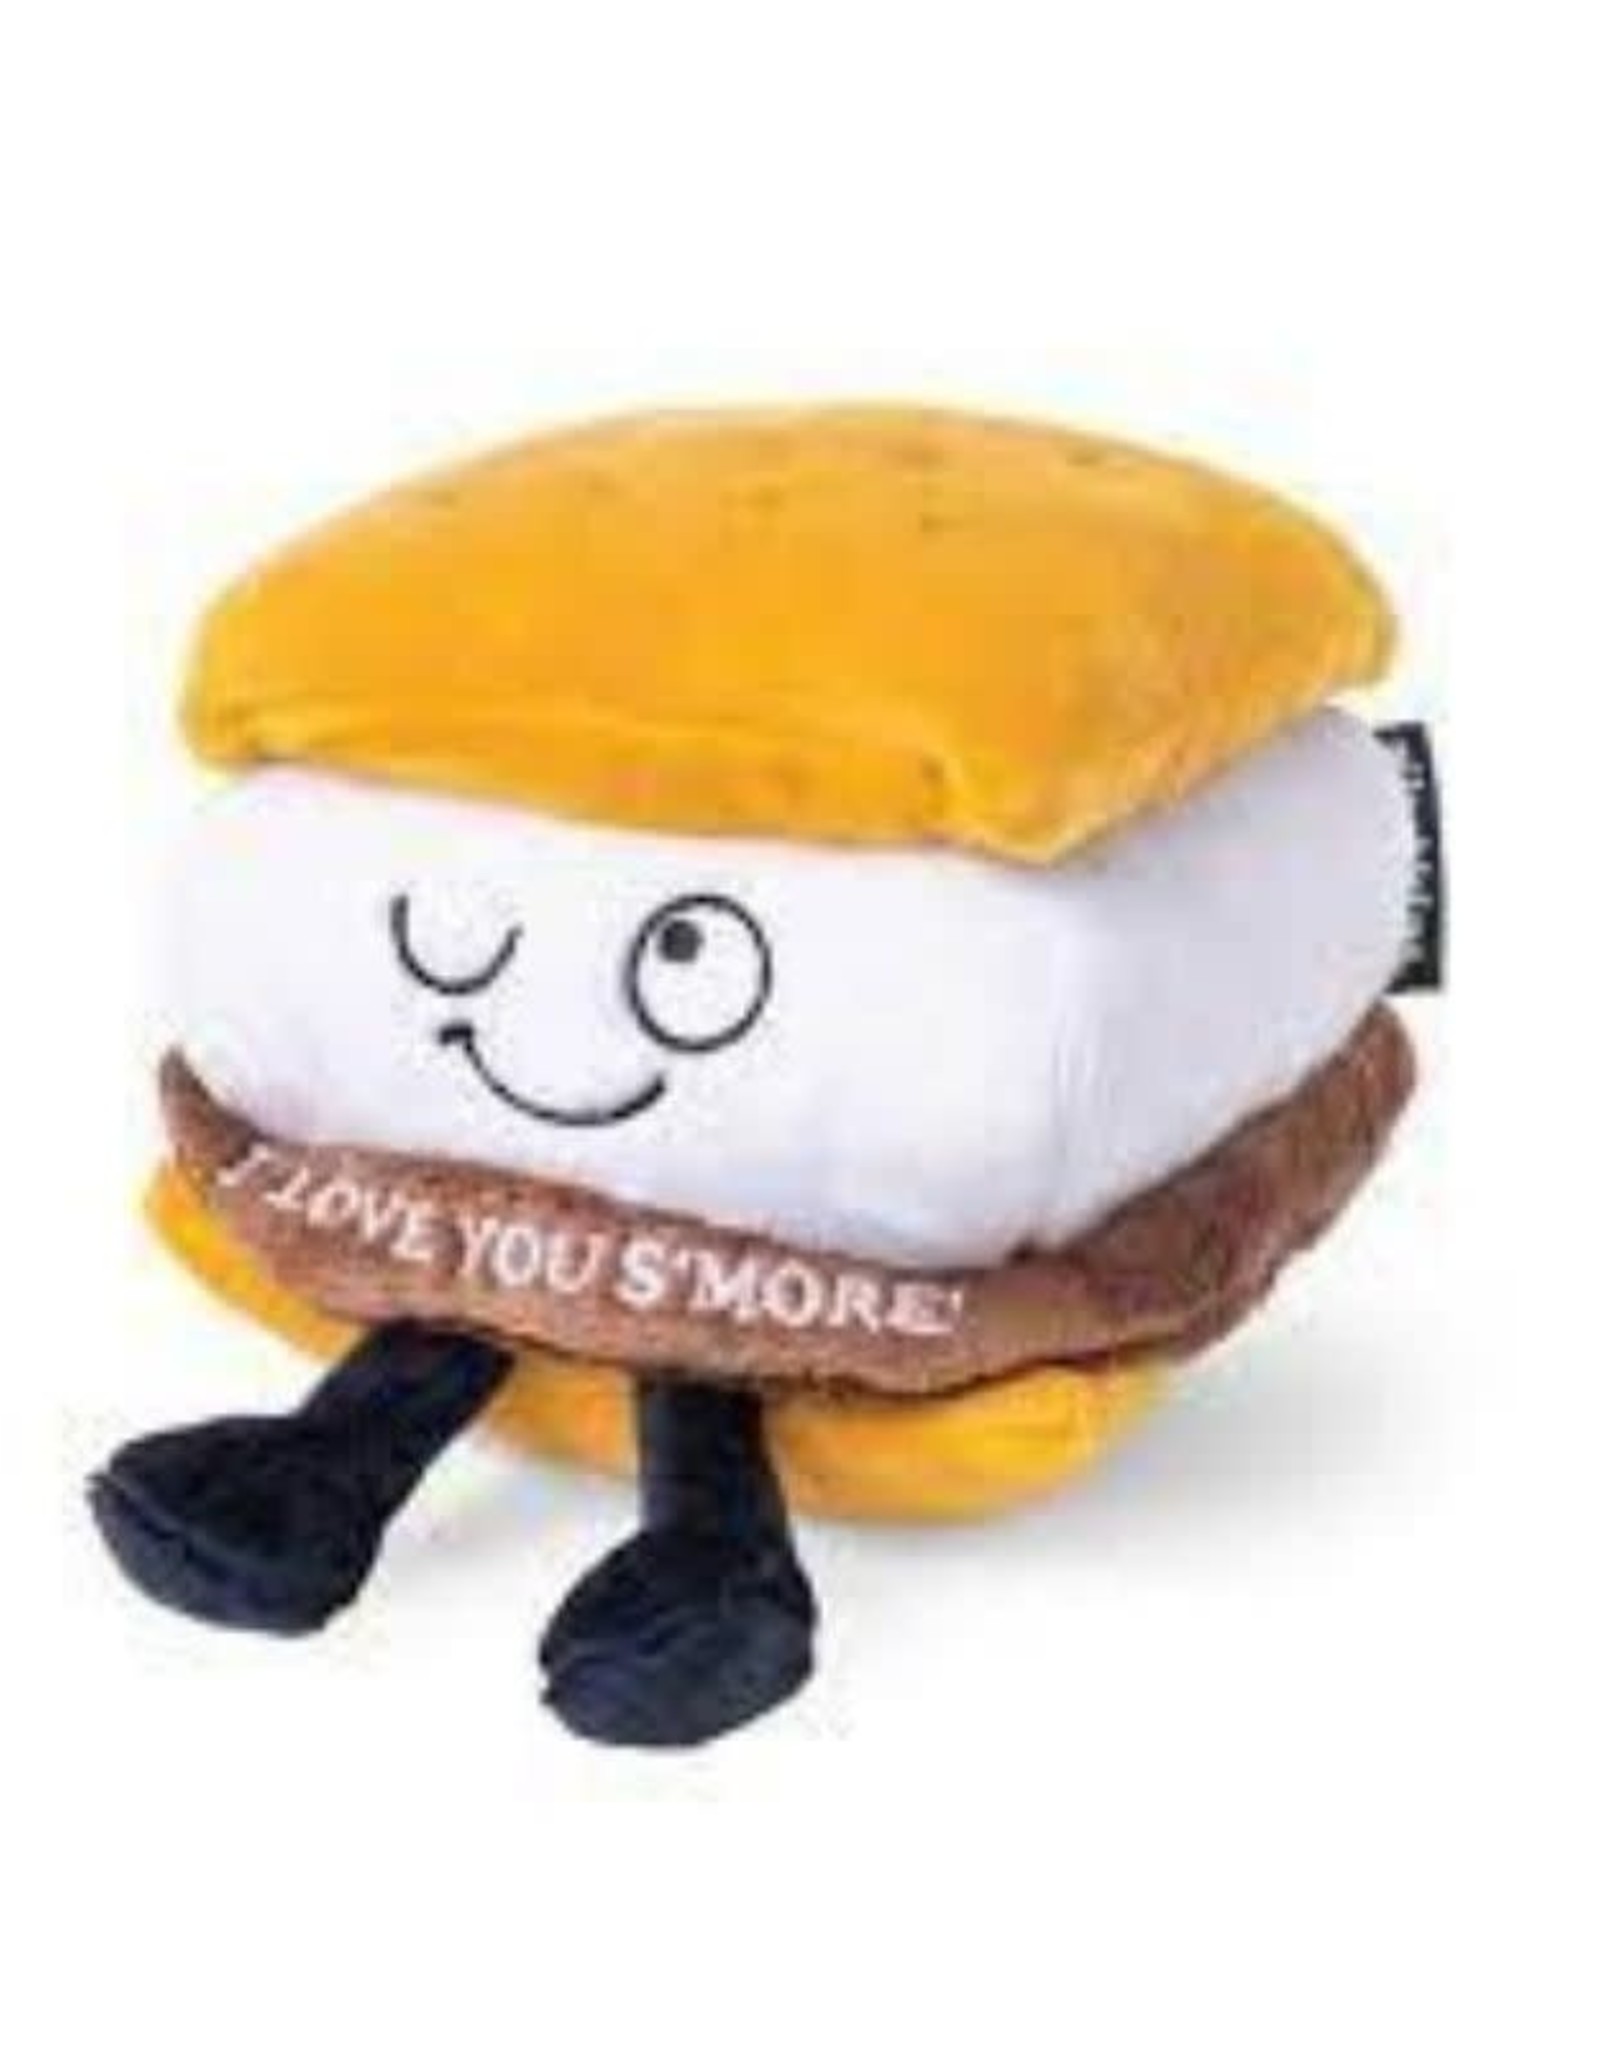 Punchkins S'more - Love You S'more